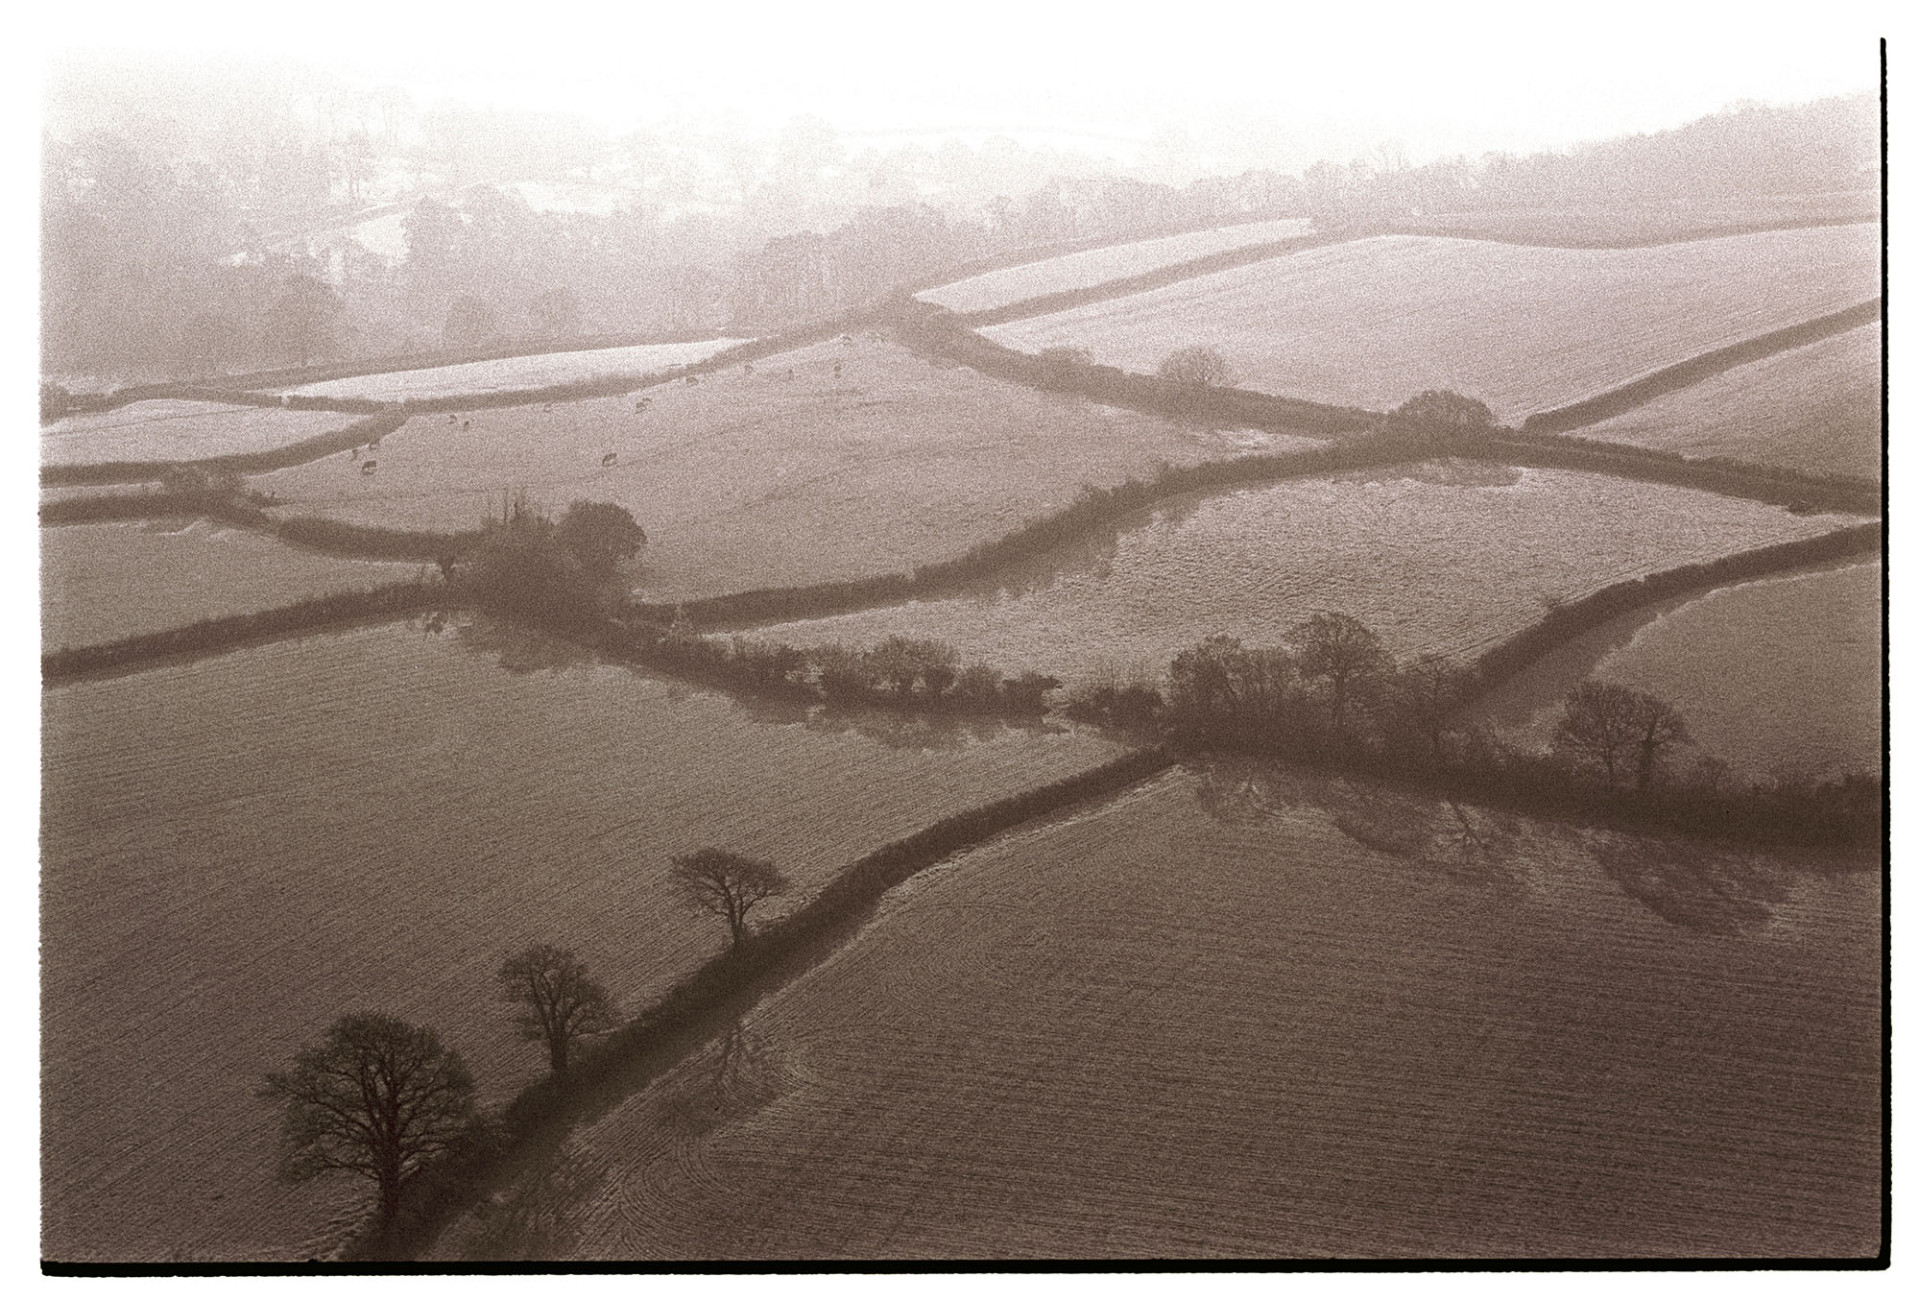 View of frosty fields and hedgerows, early morning.
[An early morning view of frosty fields and hedgerows above the River Torridge at Torrington. Livestock are grazing in one of the fields.]